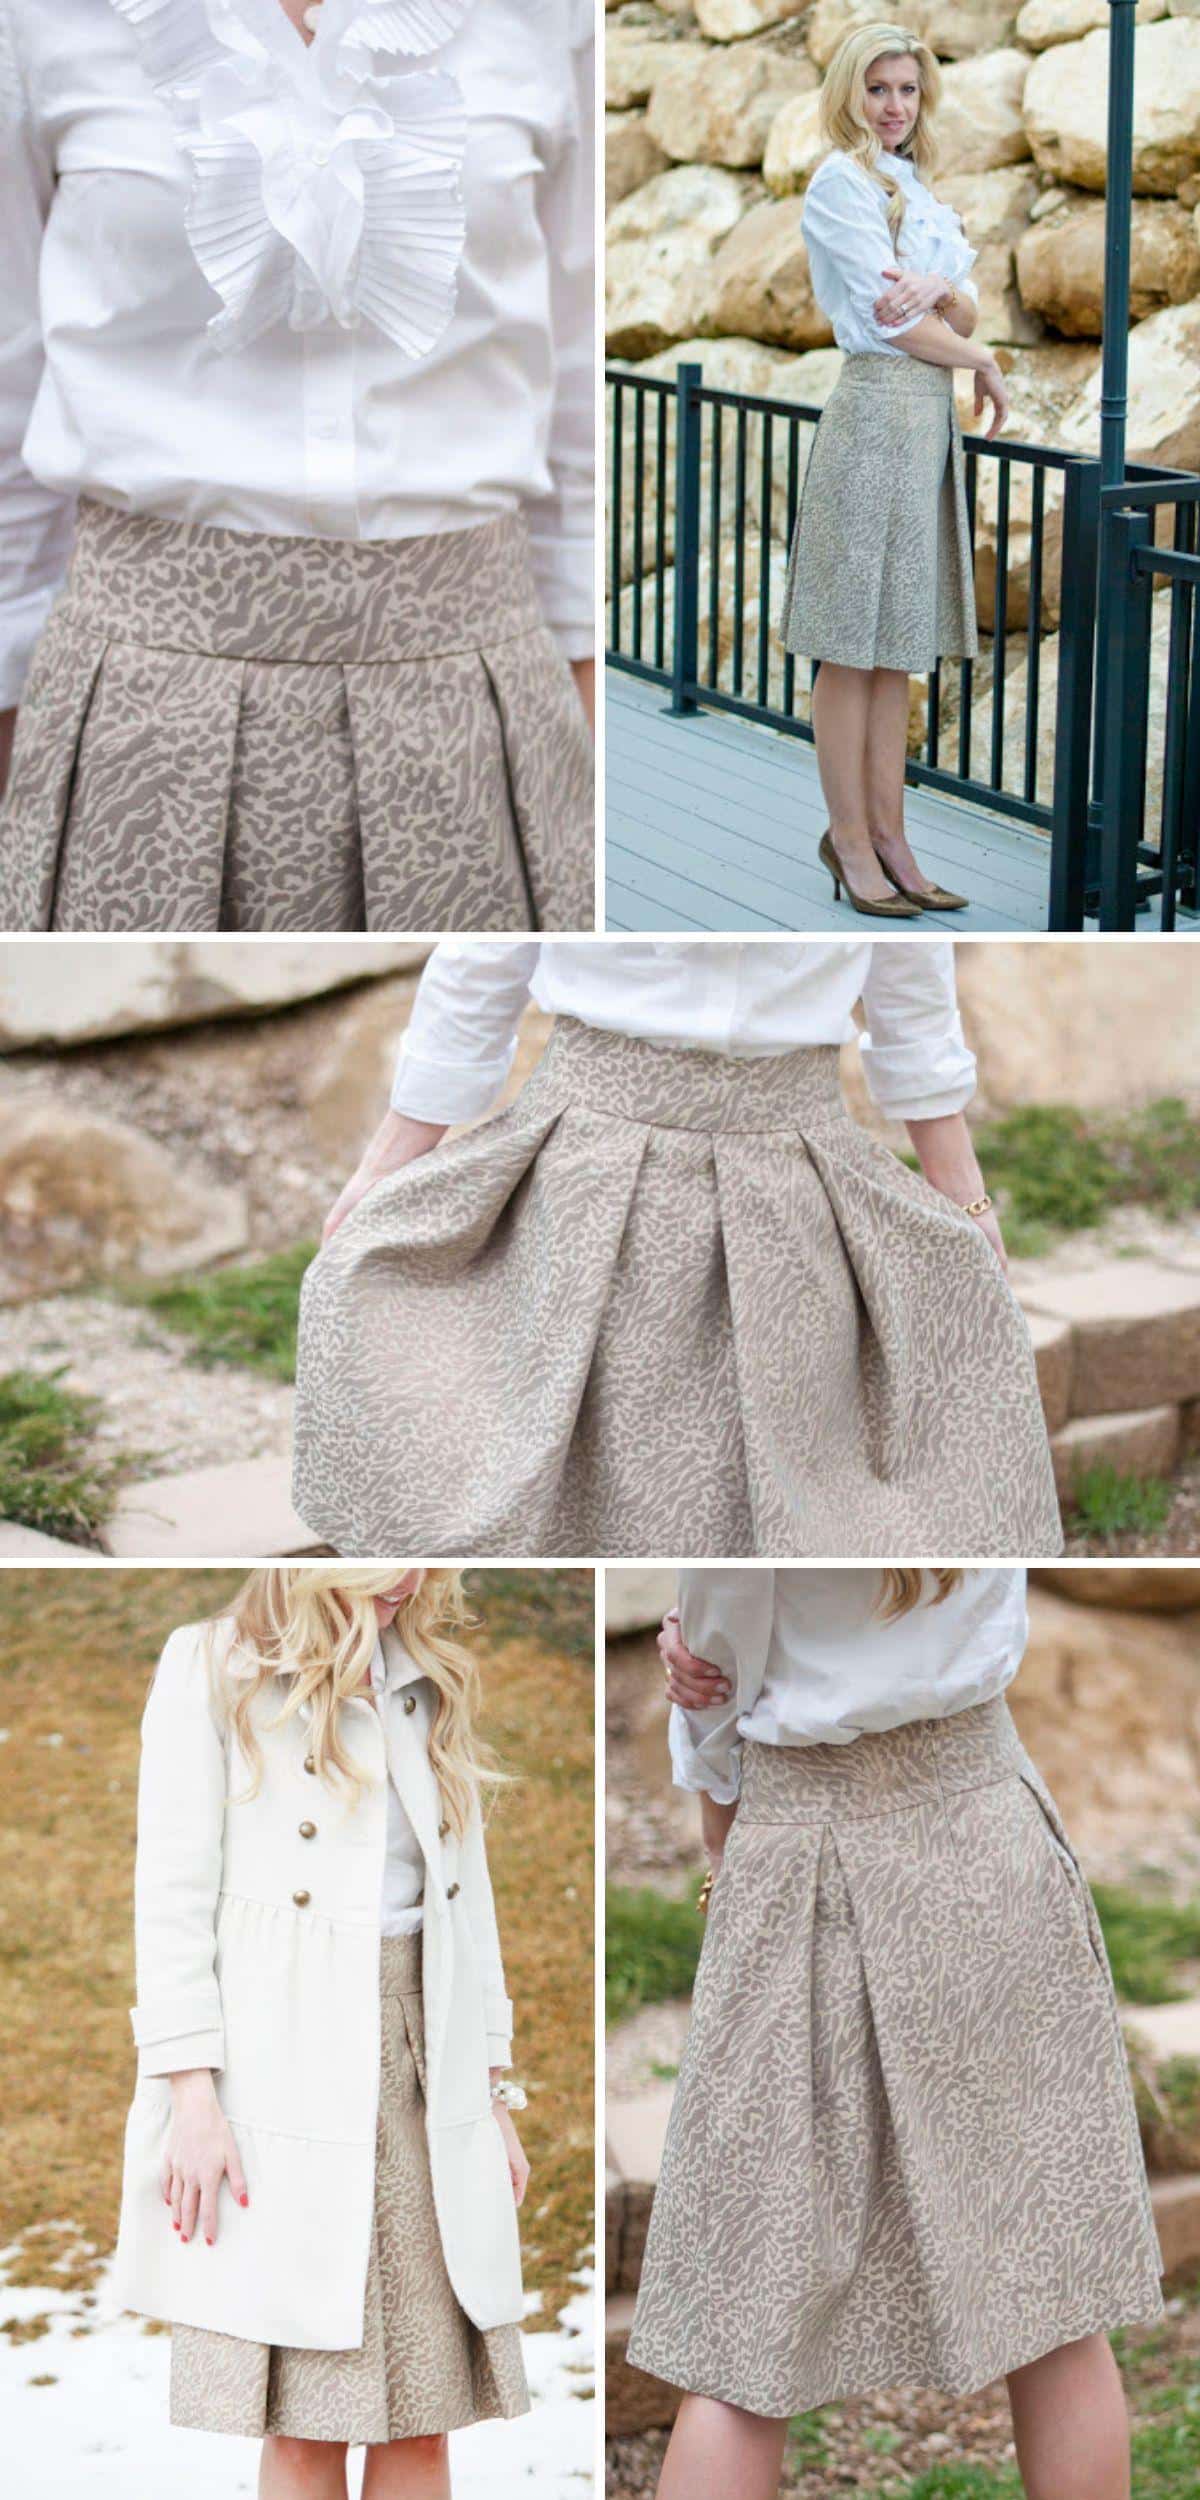 The Gilded Skirt collage.